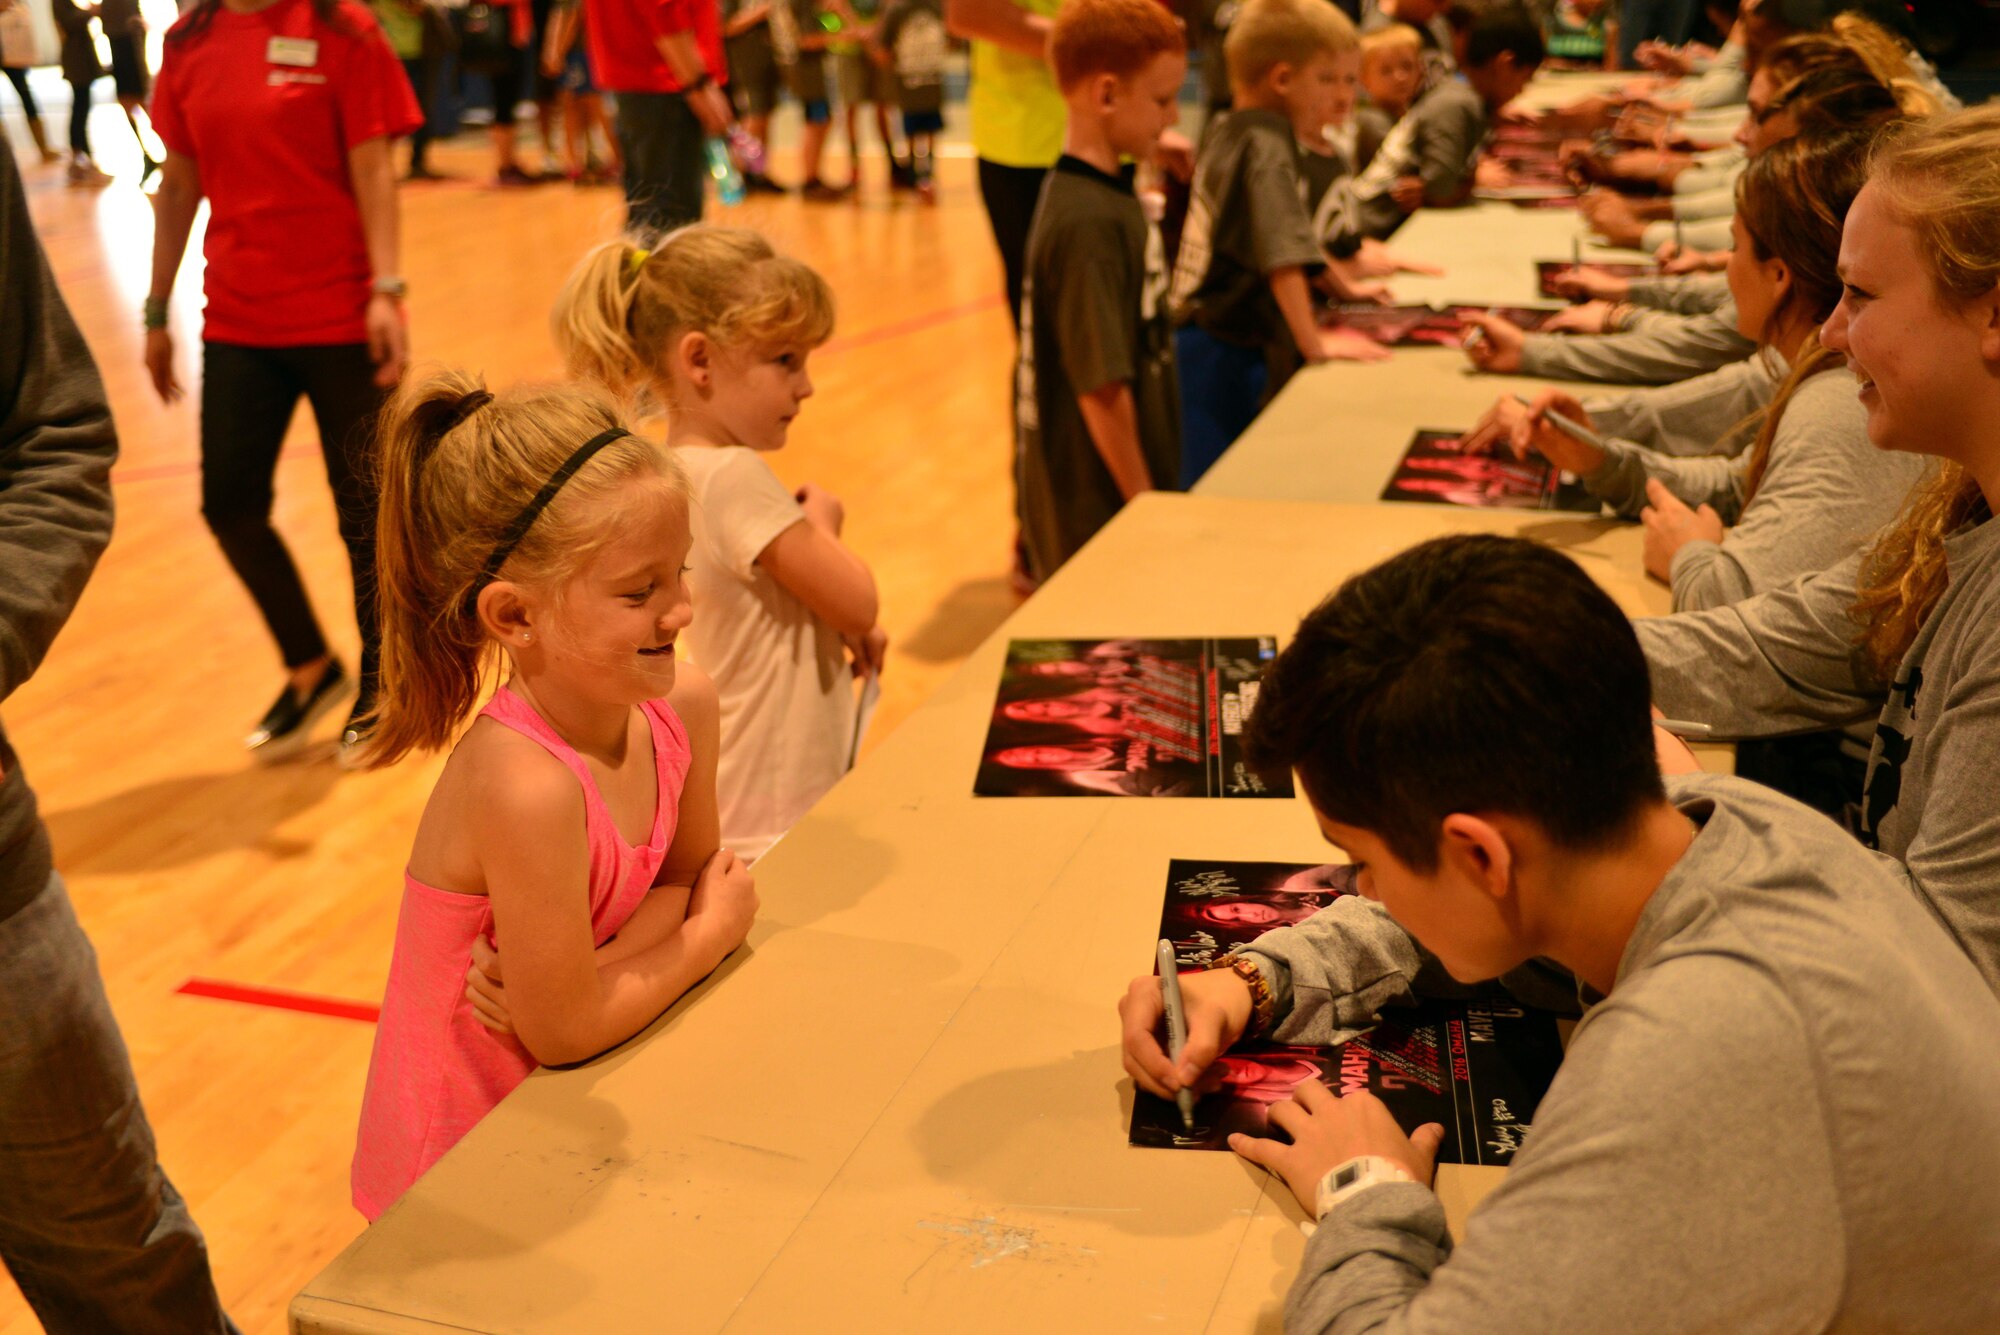 A Team Offutt child seeks an autograph from members of the University of Nebraska Omaha Mavericks men’s and women’s basketball teams Oct. 15, 2016 at the Offutt Field House.  The UNO Mavericks’ men’s and women’s basketball teams provided a free basketball clinic to more than 100 military-affiliated children. Nebraska Governor Pete Ricketts spoke to the campers and passed along thanks from the citizens of Nebraska to the members of Team Offutt. 